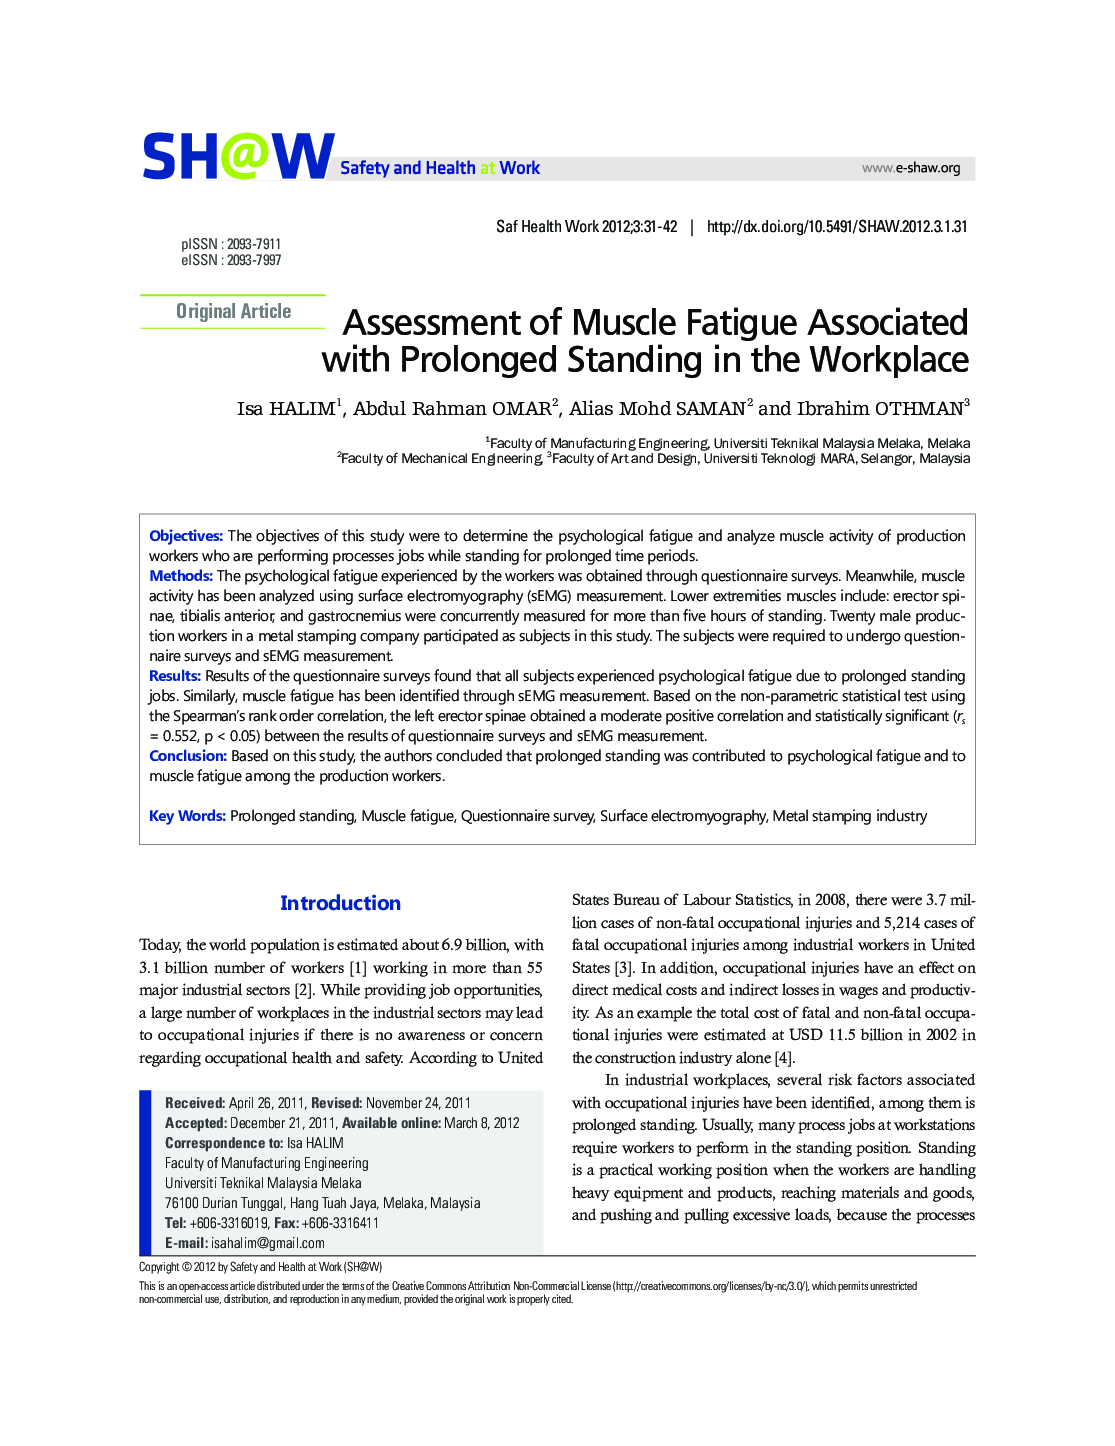 Assessment of Muscle Fatigue Associated with Prolonged Standing in the Workplace